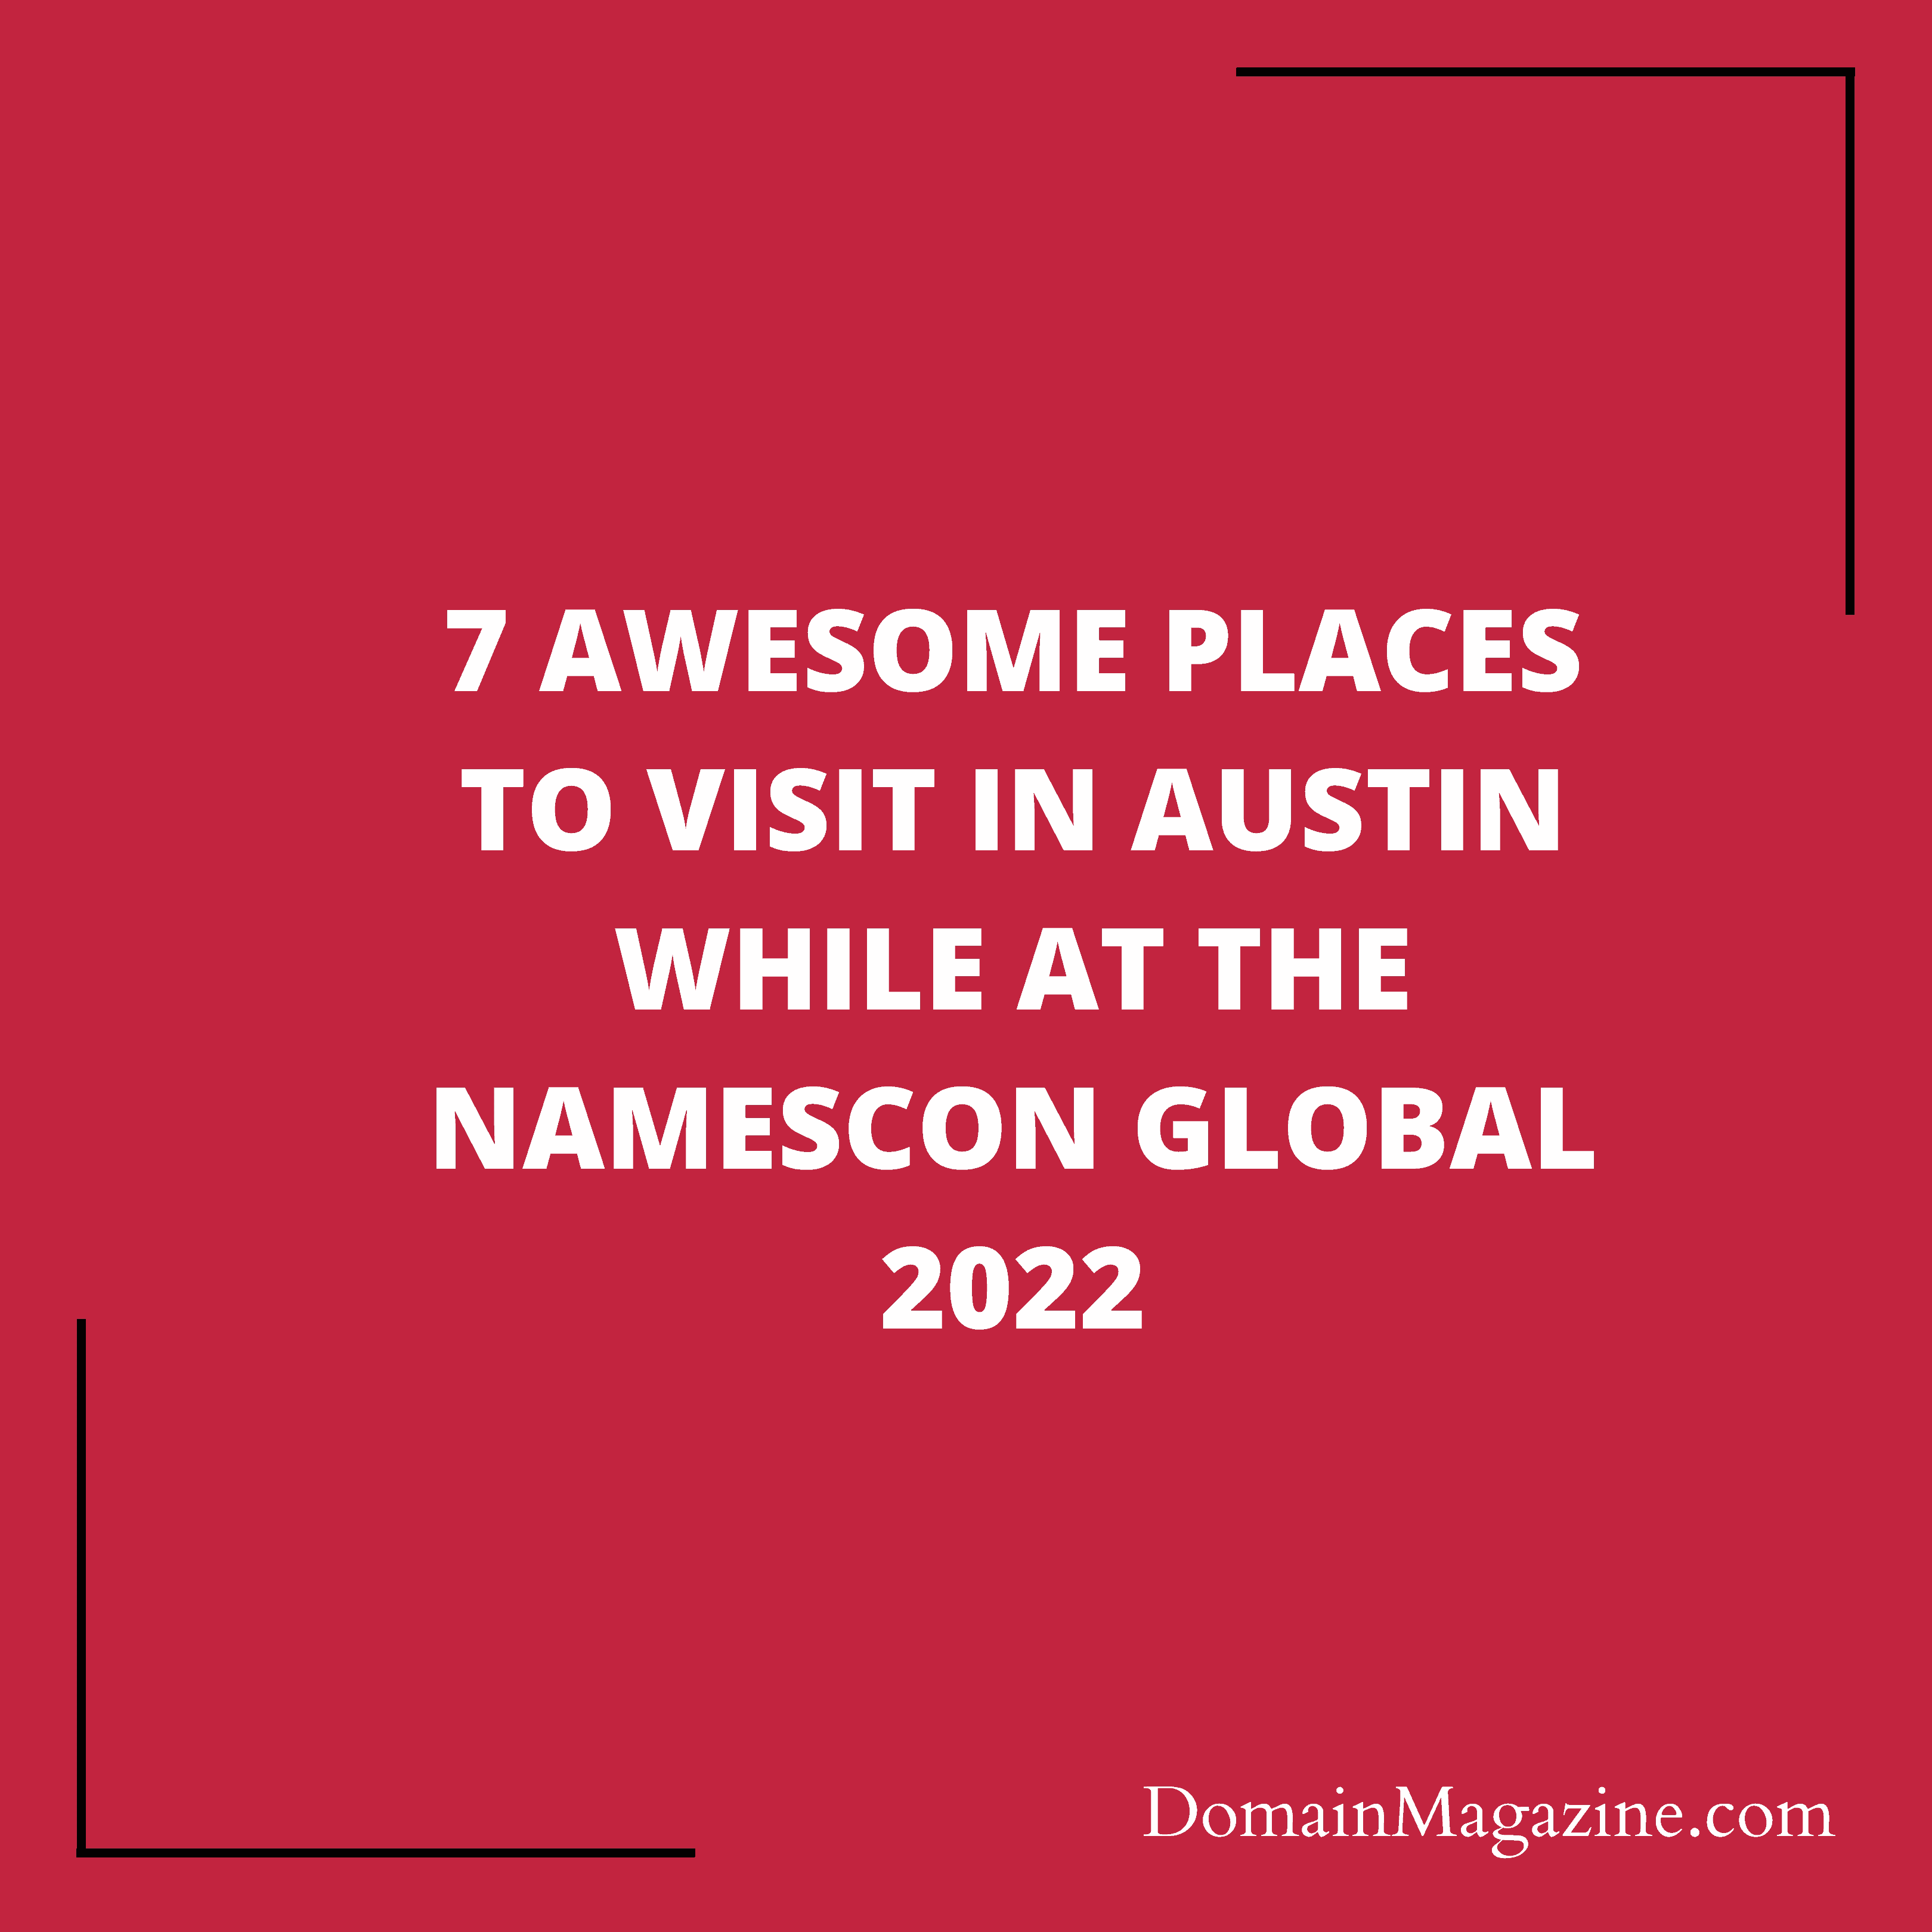 7 awesome places to visit in Austin while at the NamesCon Global 2022